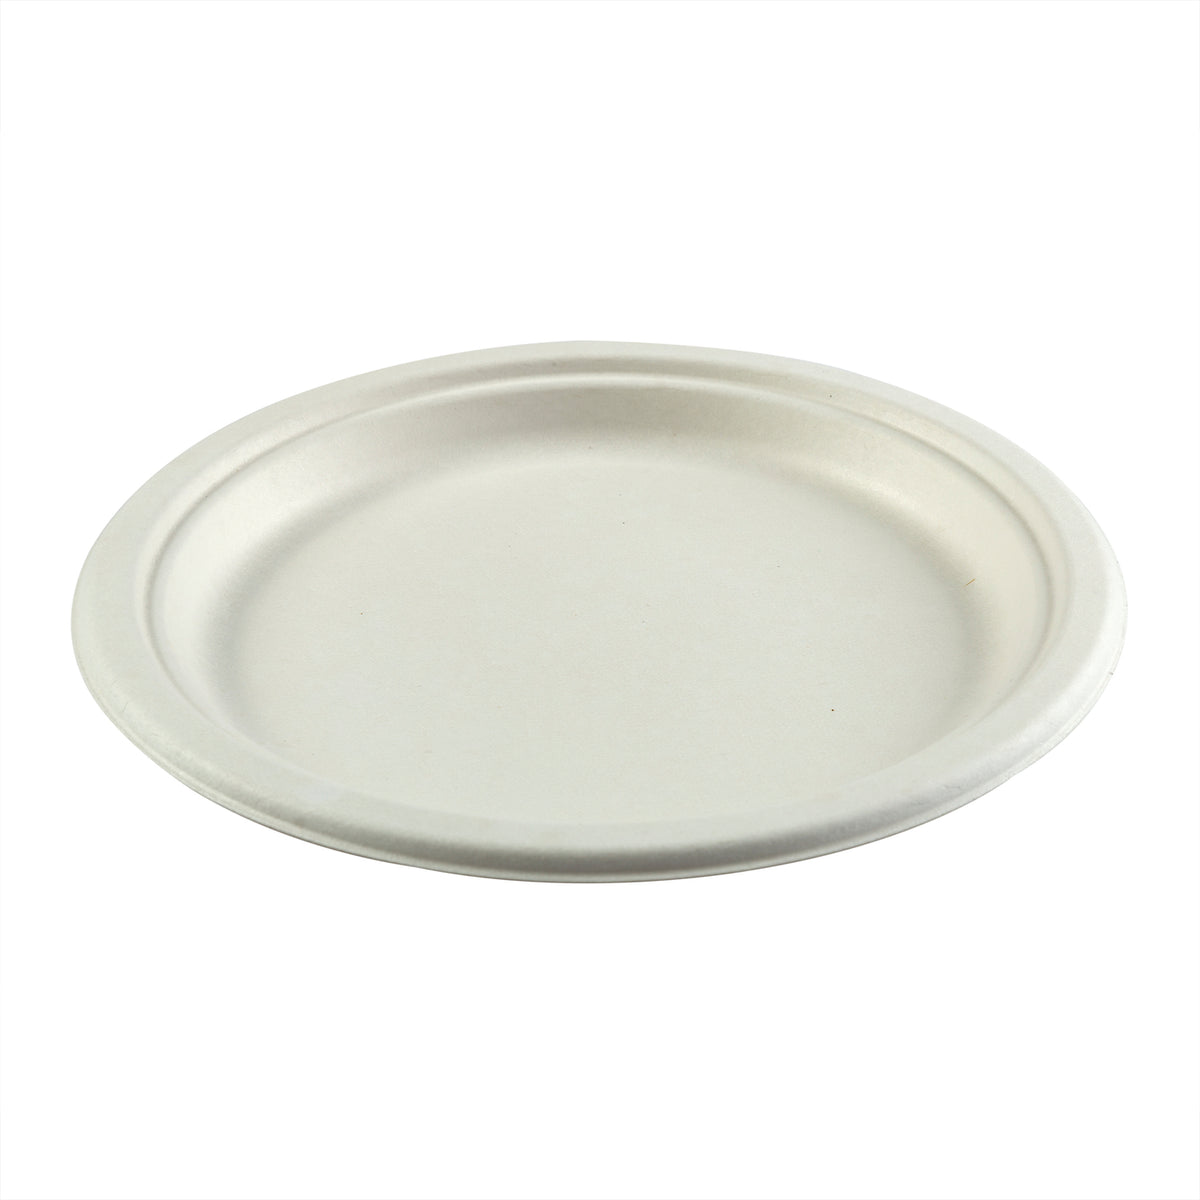 PLATE EPL-06 WHITE 6